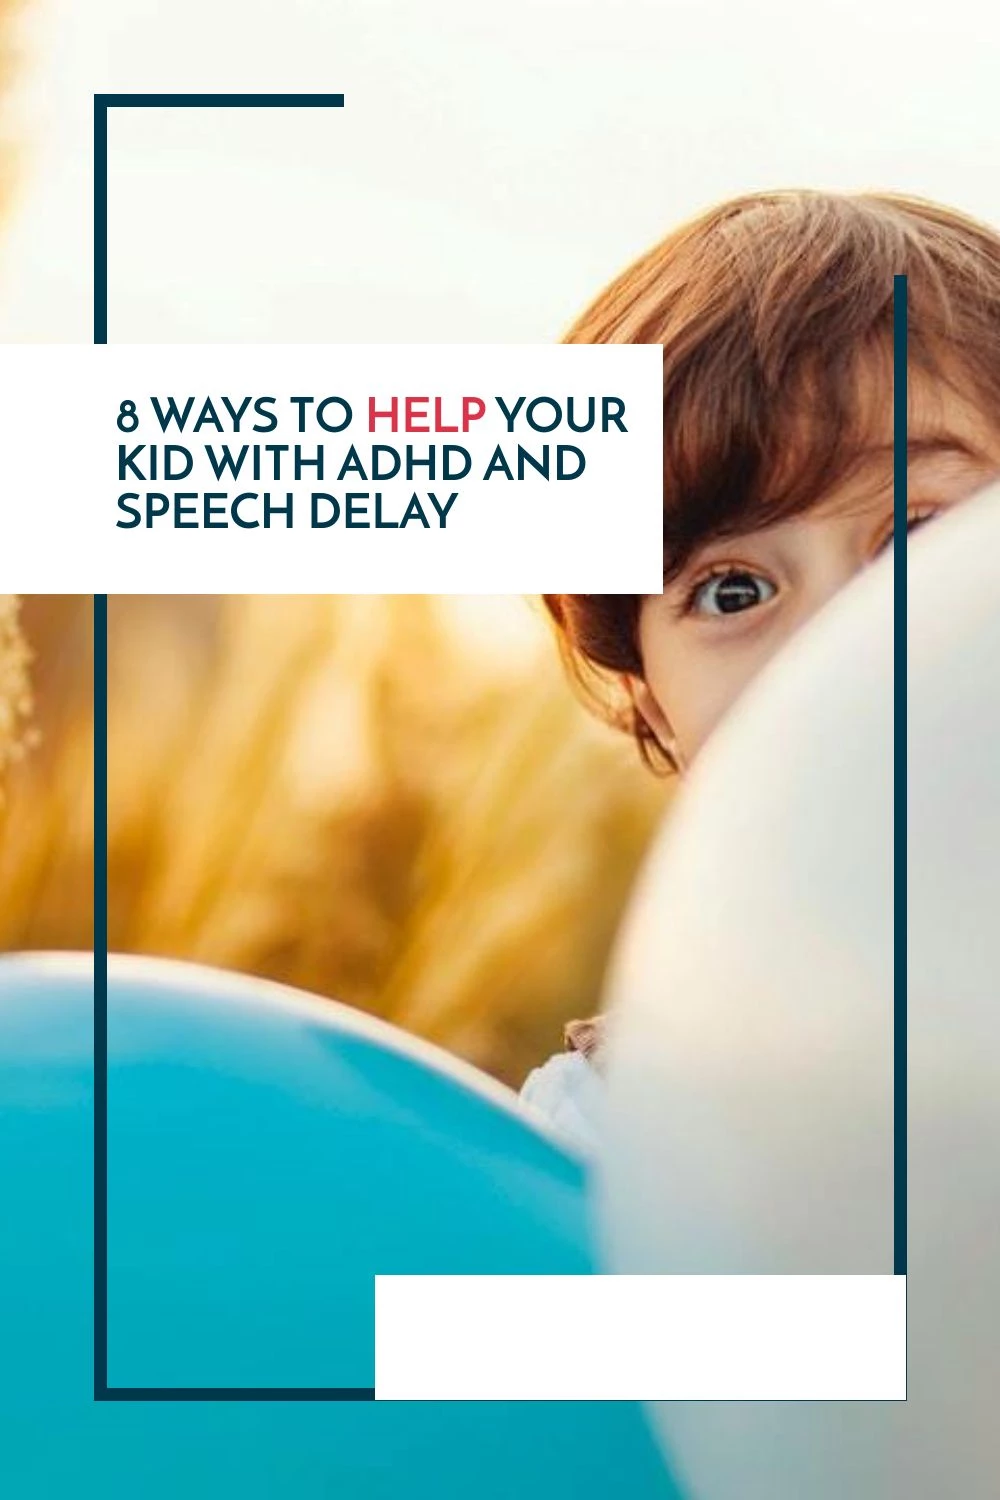 How To Help Your Speech Delayed Kid Talk - ADHD and Speech Delay In Kids - Helping Your Kid With ADHD and Speech Delay